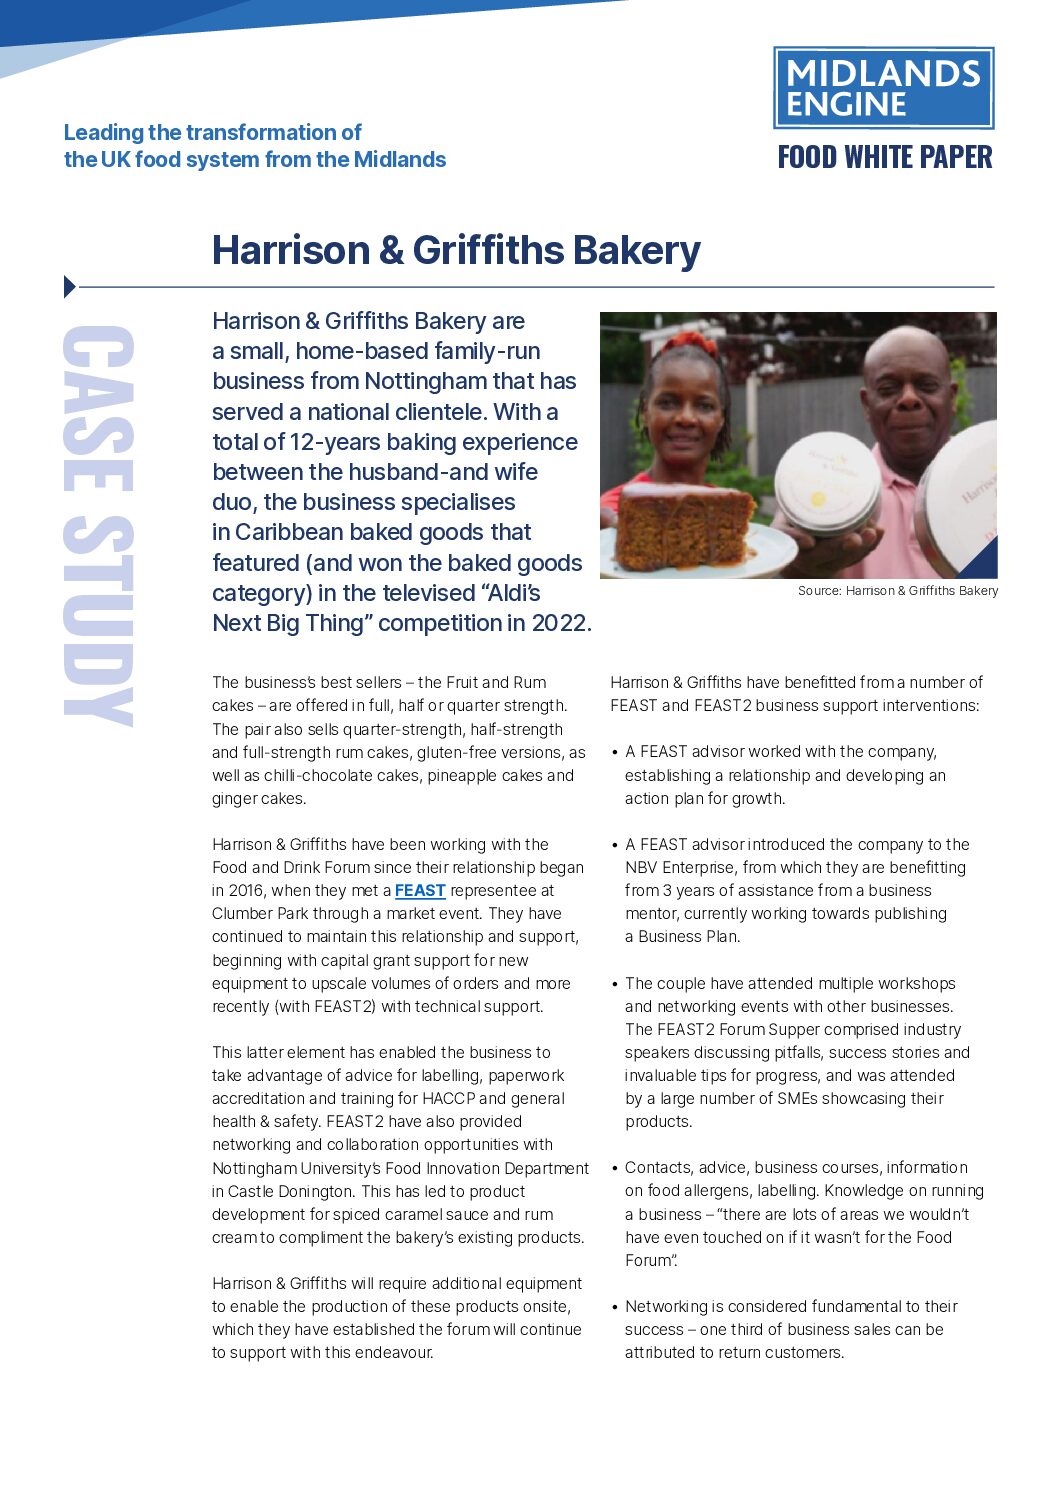 Harrison and Griffiths Bakery Case Study